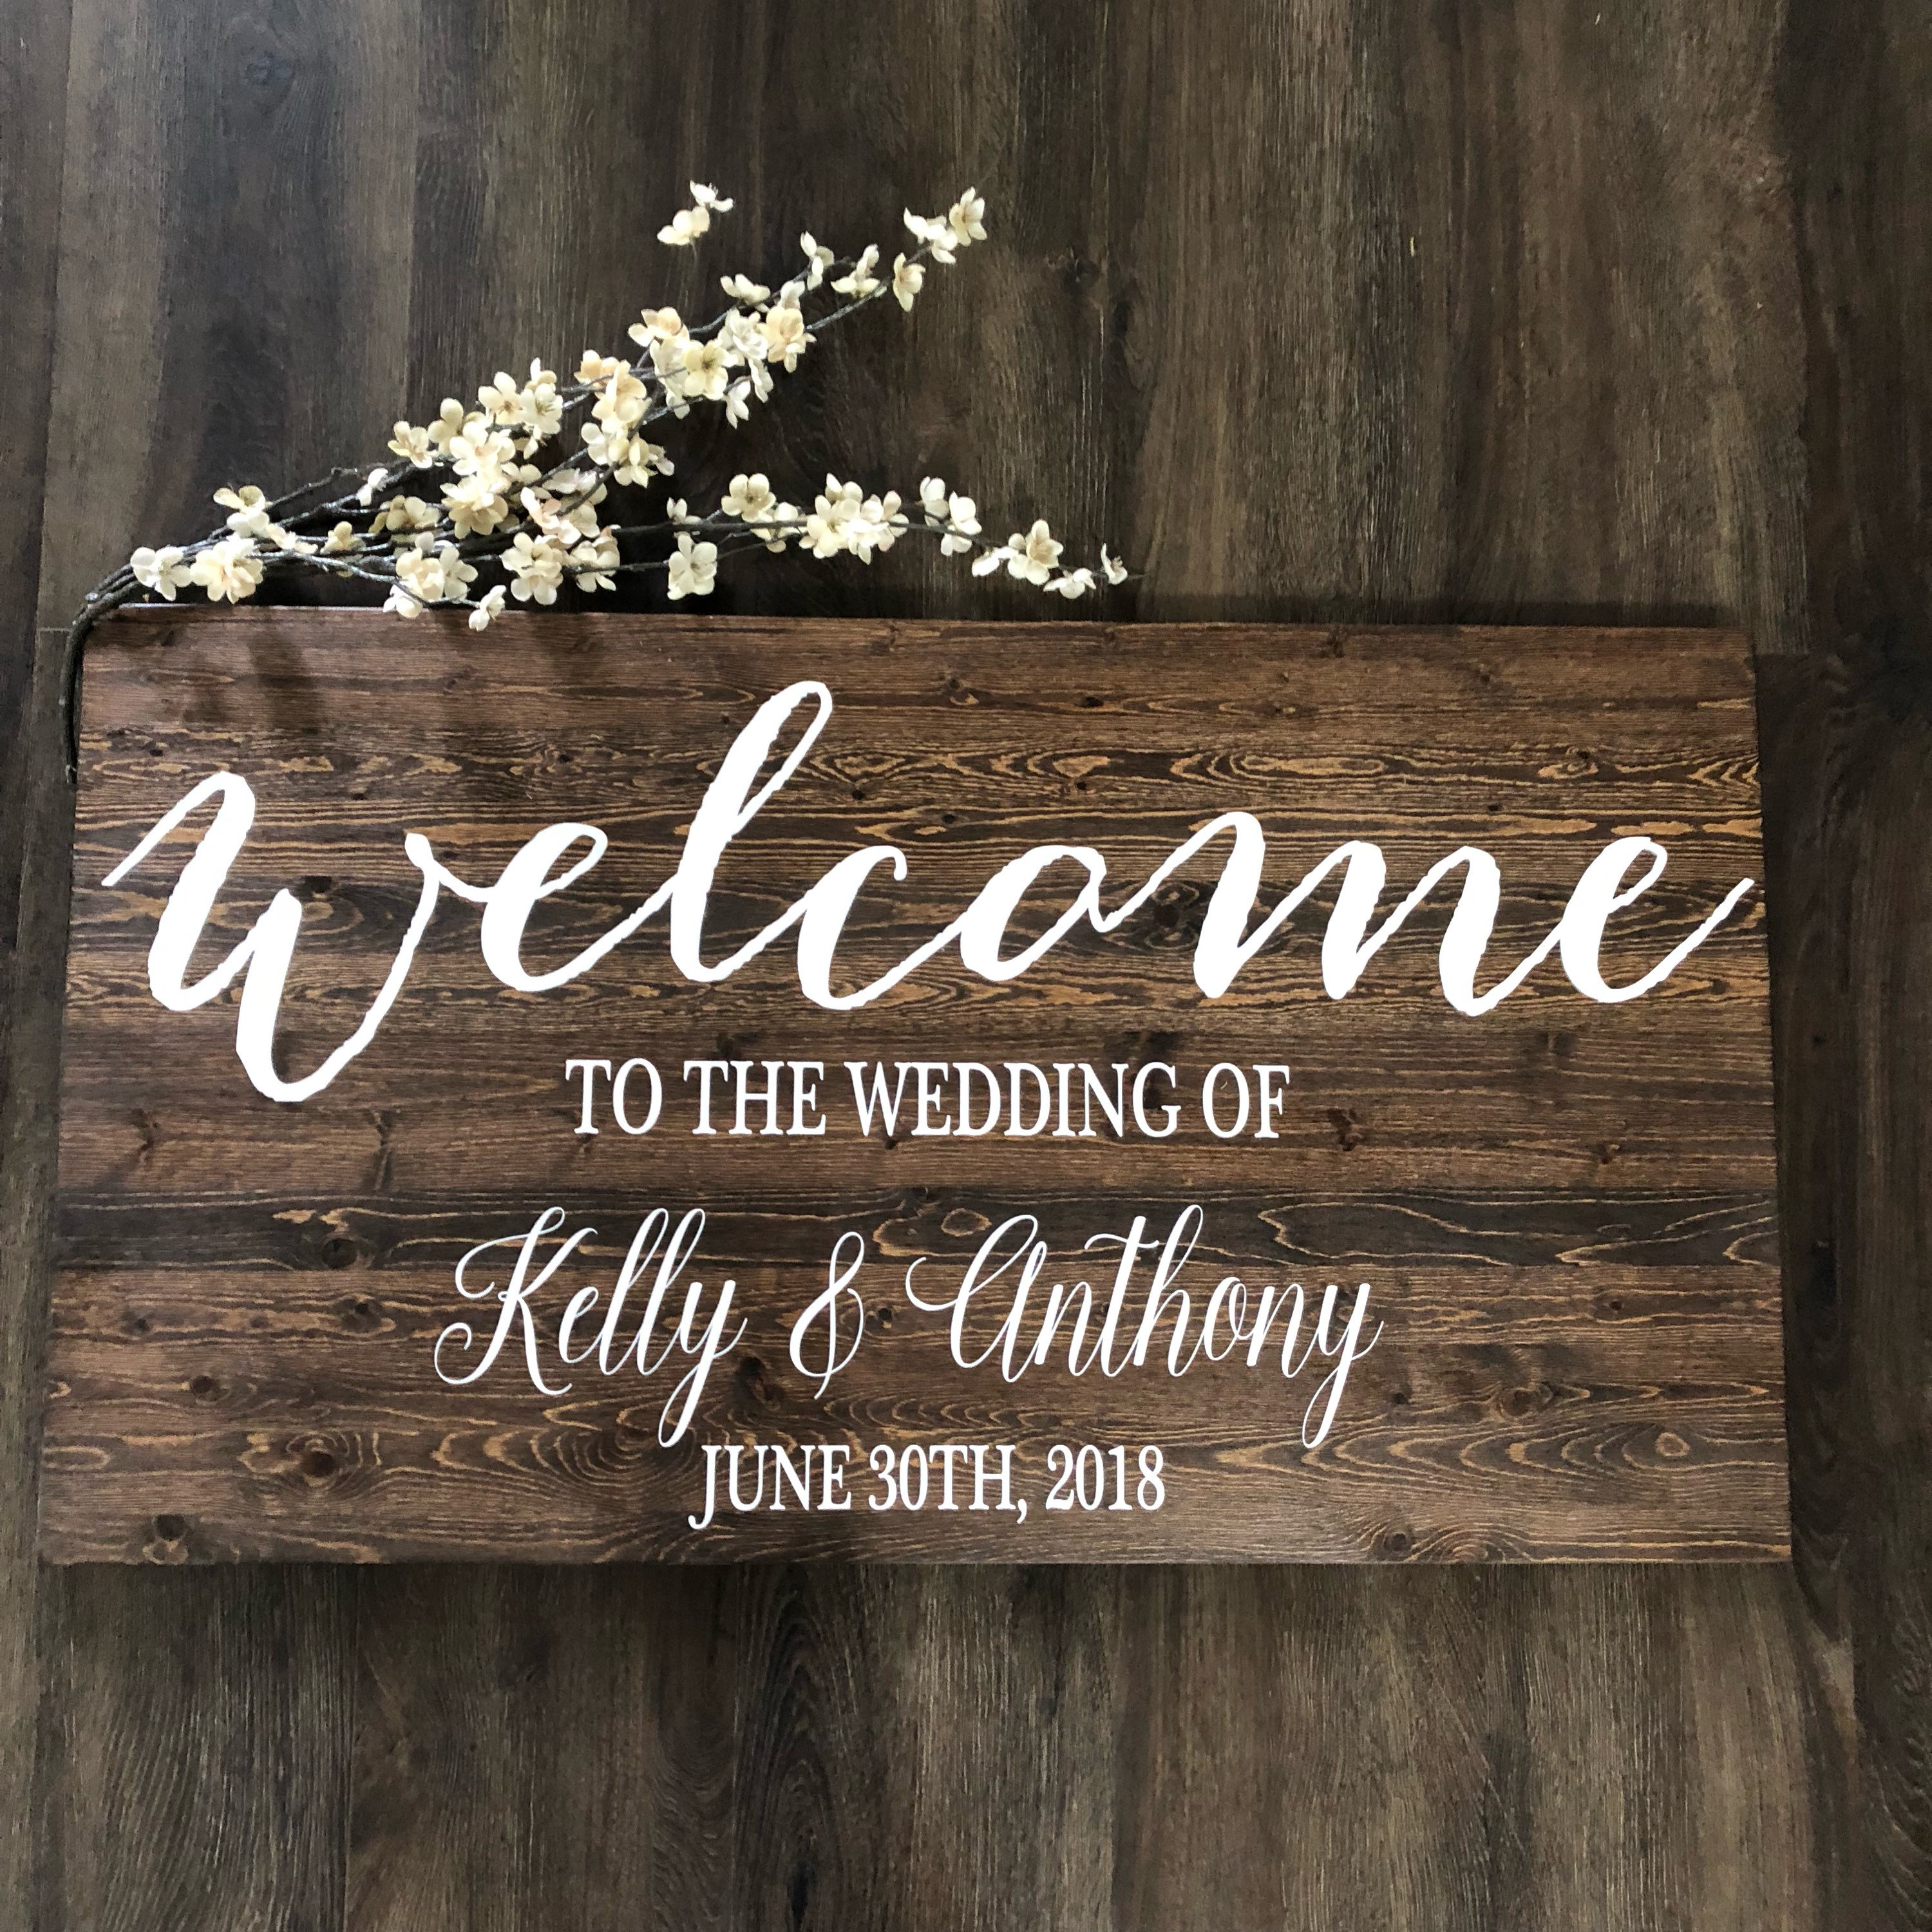 Wedding Welcome Sign / Rustic Wood Wedding Sign / Rustic Wedding Decor /  Country Wedding Bestseller Wedding Sign